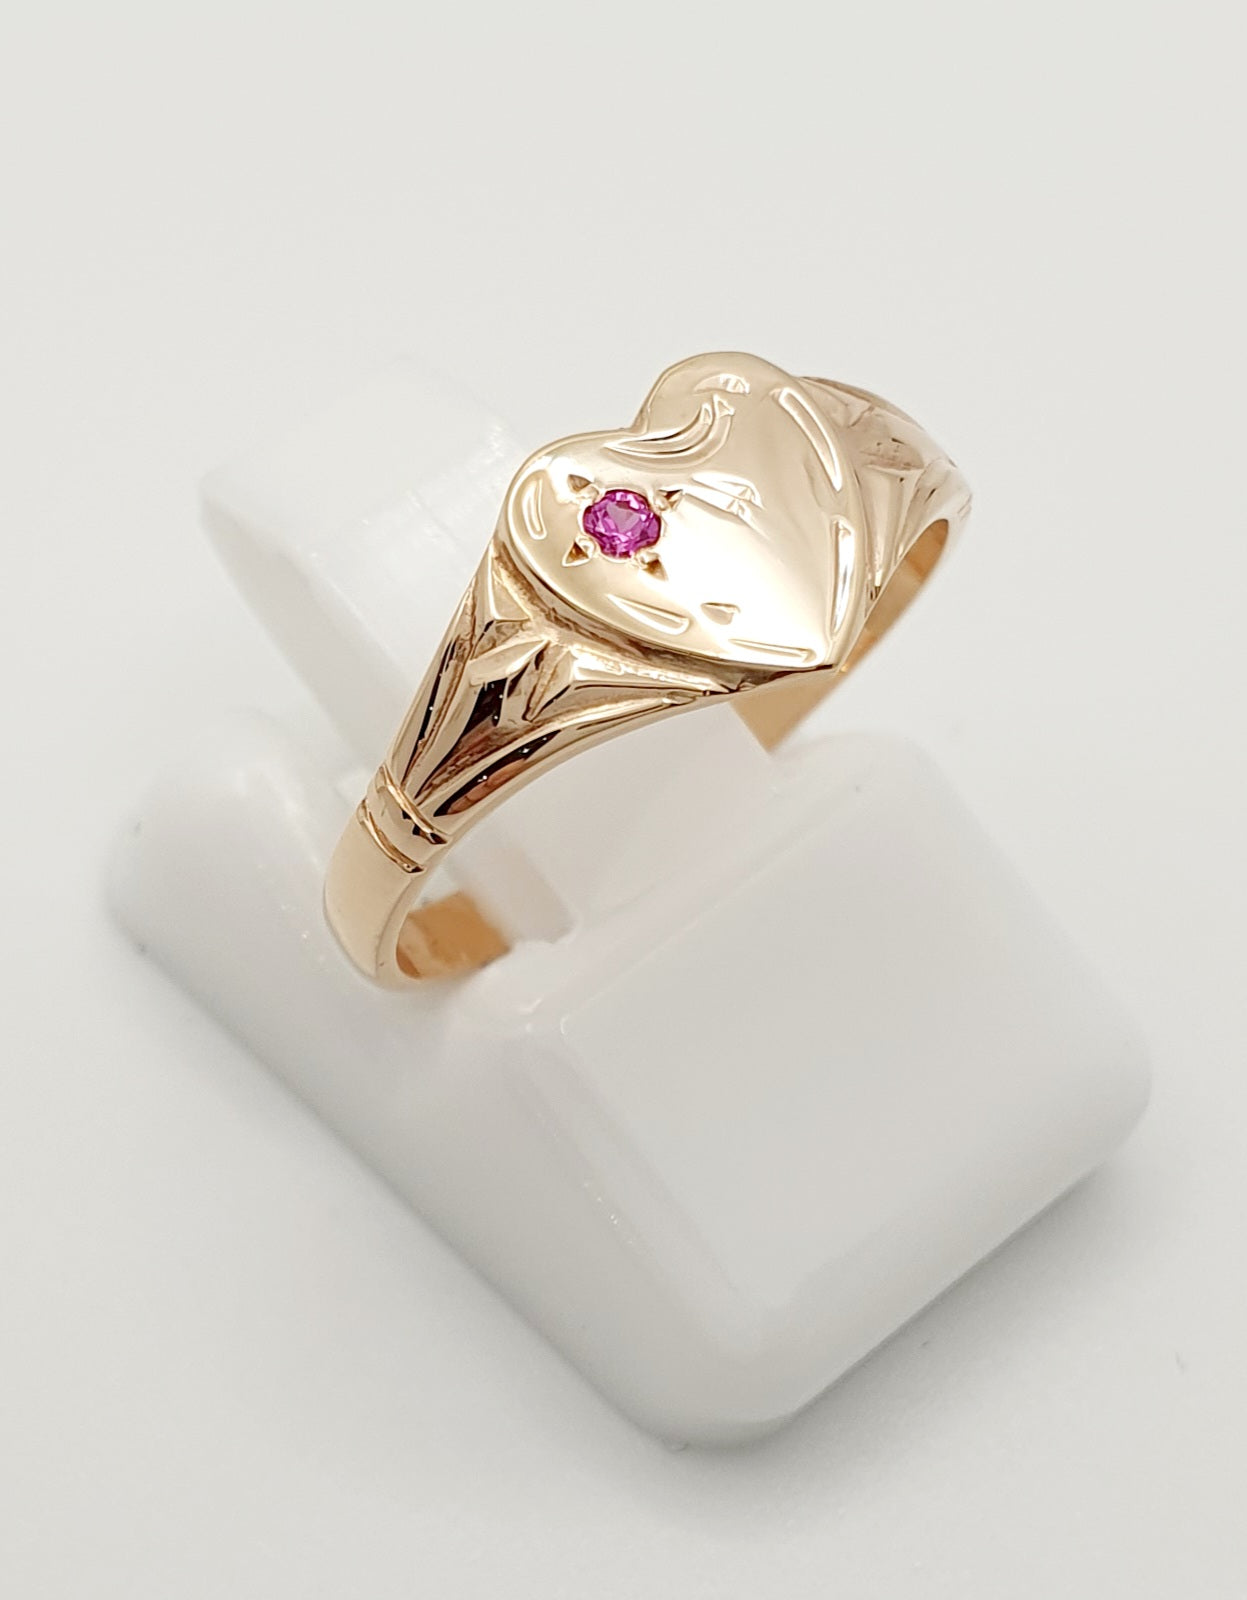 9ct Rose Gold, Heart Signet Ring with Red Stone. Size H 1/2